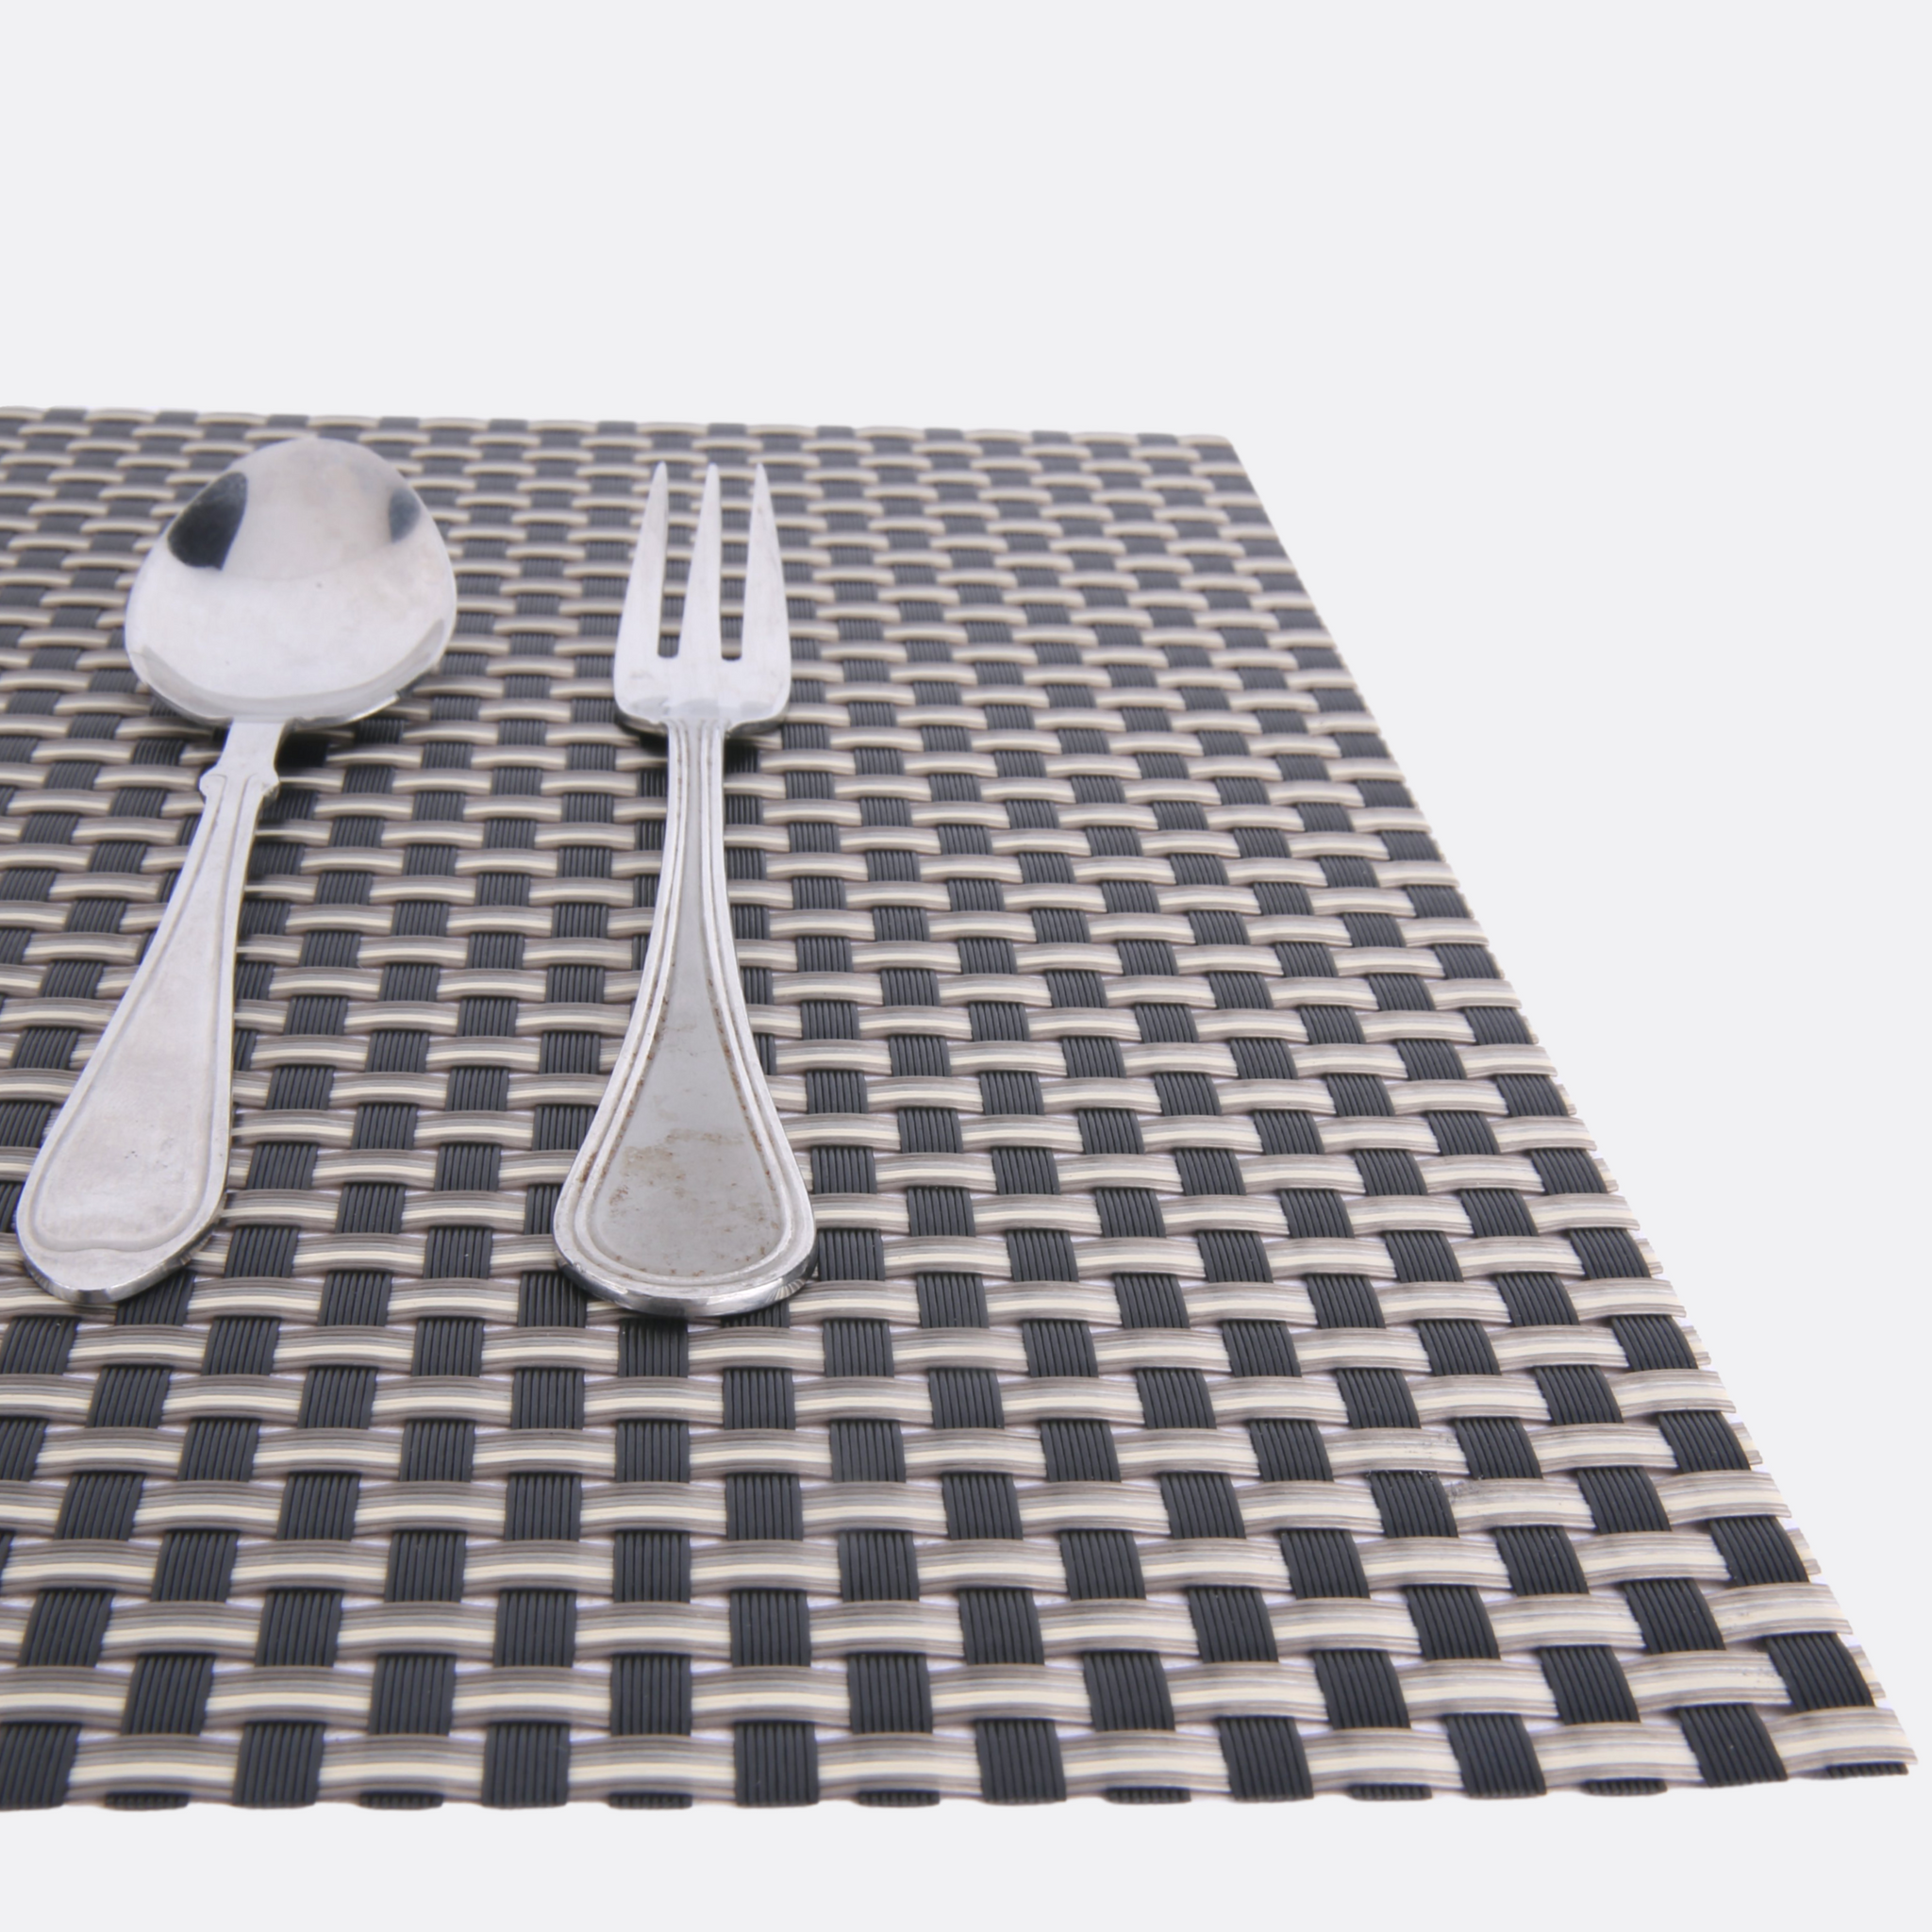 Self Textured Ductile place Mats (Set Of 2)